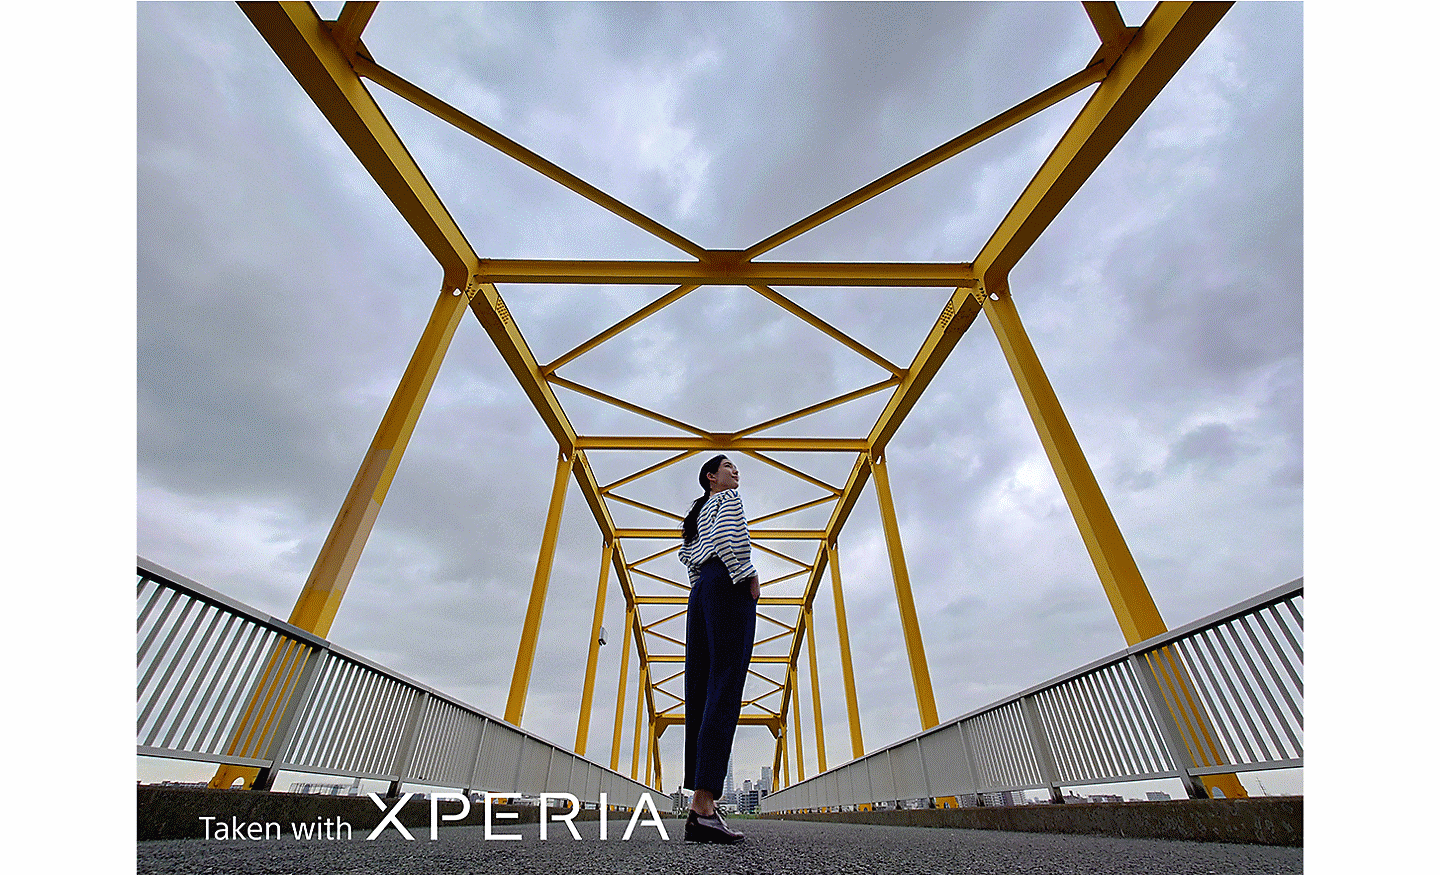 Striking image of a woman posing on a metal bridge. Text reads "Taken with XPERIA".